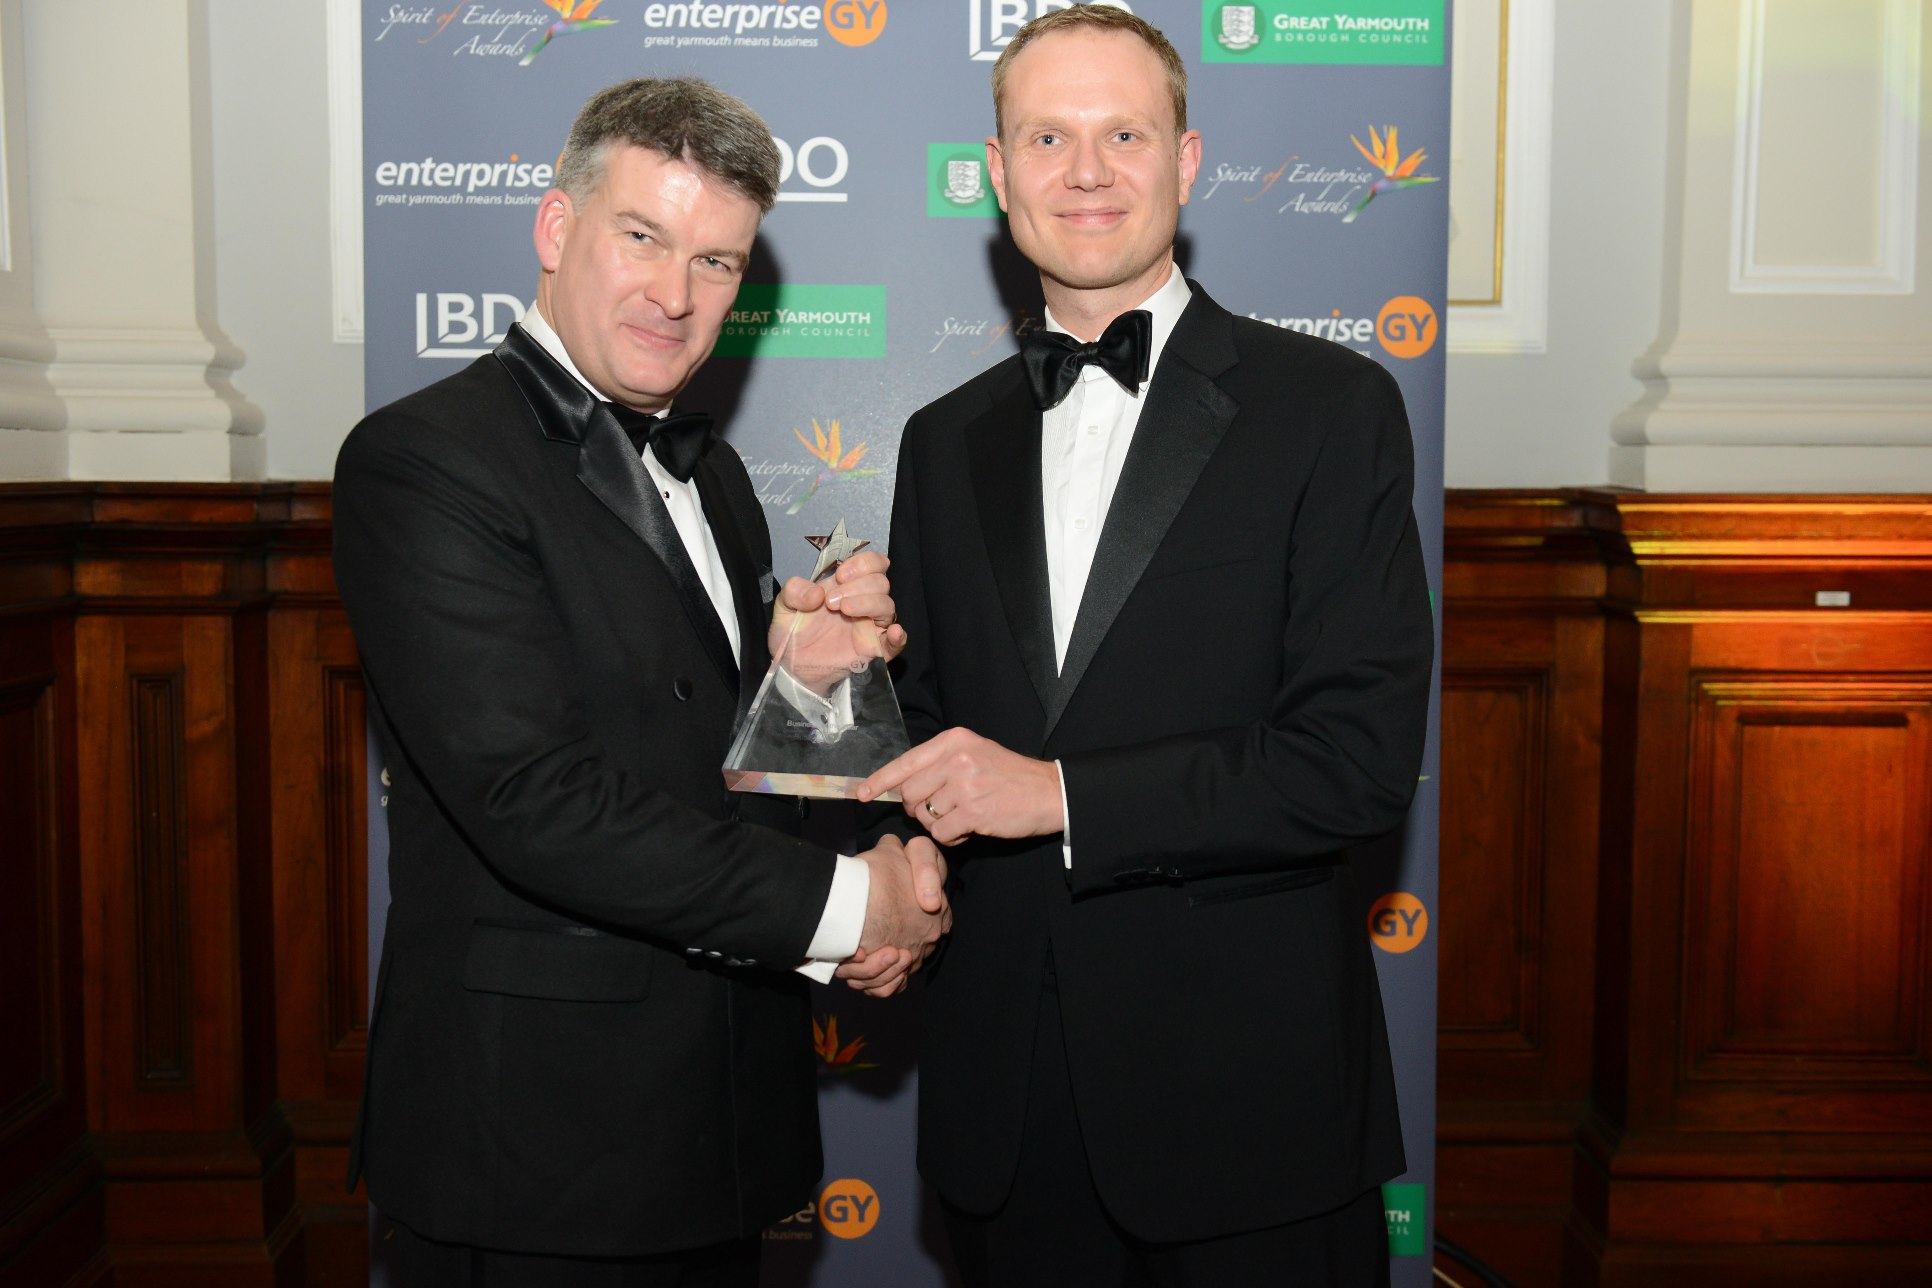 Offshore Energy Companies Win Great Yarmouth's Business Awards